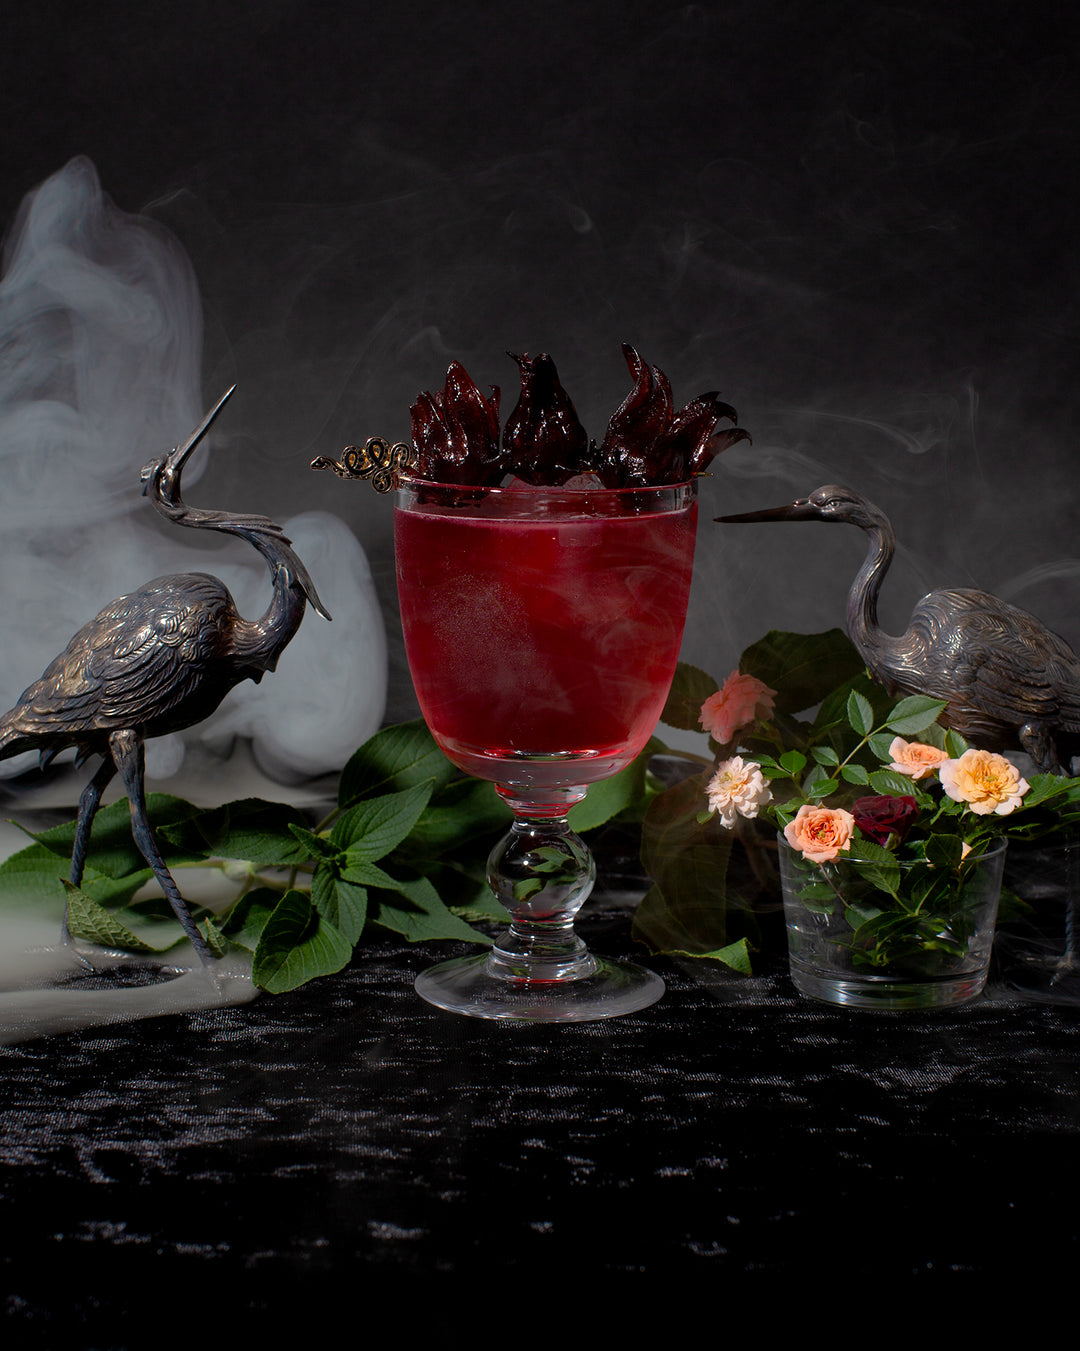 Bad Blood cocktail next to two silver crane statuettes, with fresh herbs and flowers, surrounded by smoke.